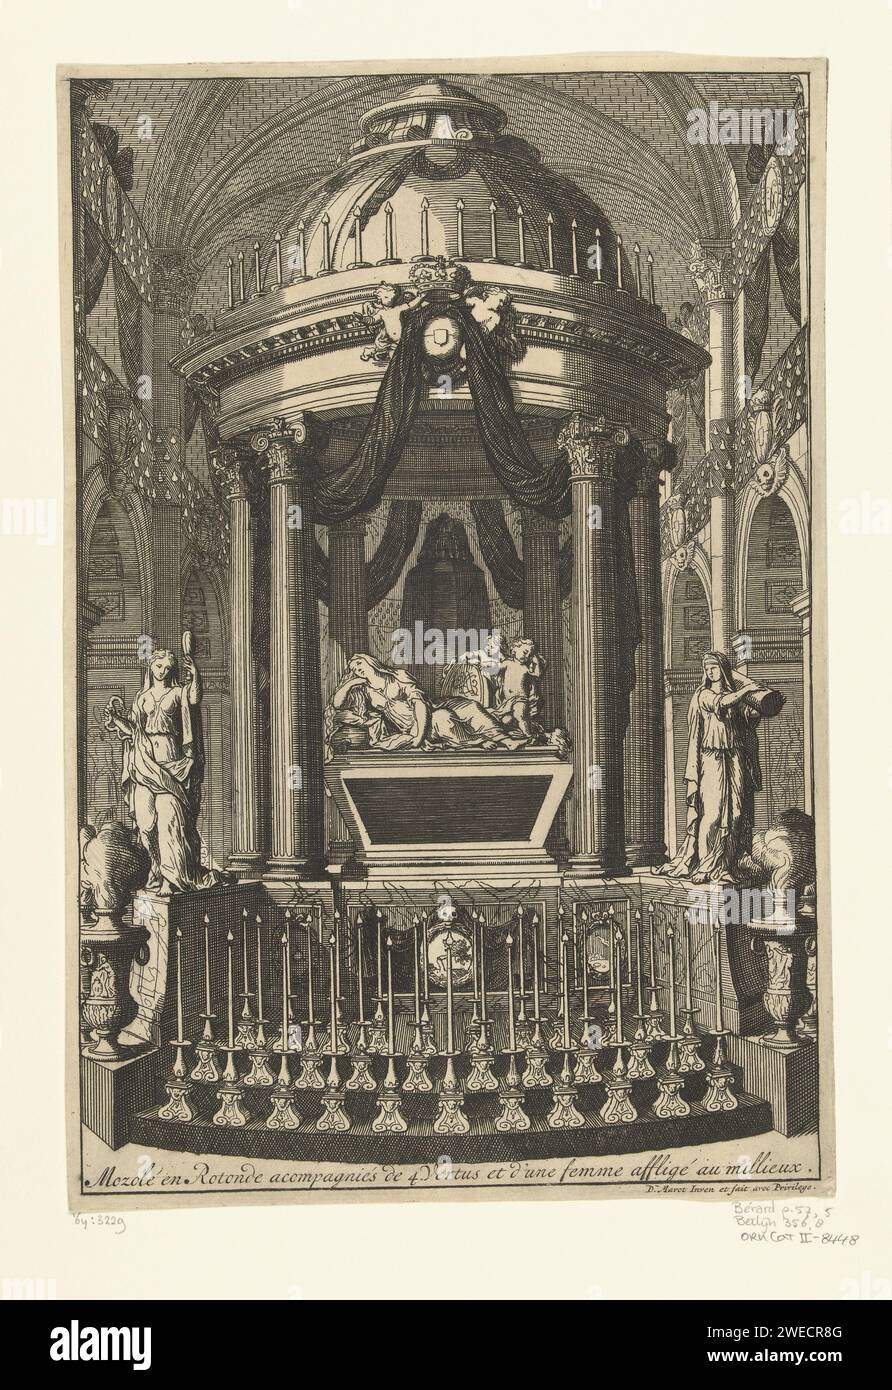 Mausoleum, Daniël Marot (I), c. 1705 - c. 1712 print Graftombe in a church with a lying woman and two children with a shield wearing a monogram (WR, William Rex). On the main frame of the Tempietto is a crowned coat of arms (from William II). From series of 6 magazines.  paper etching Stock Photo